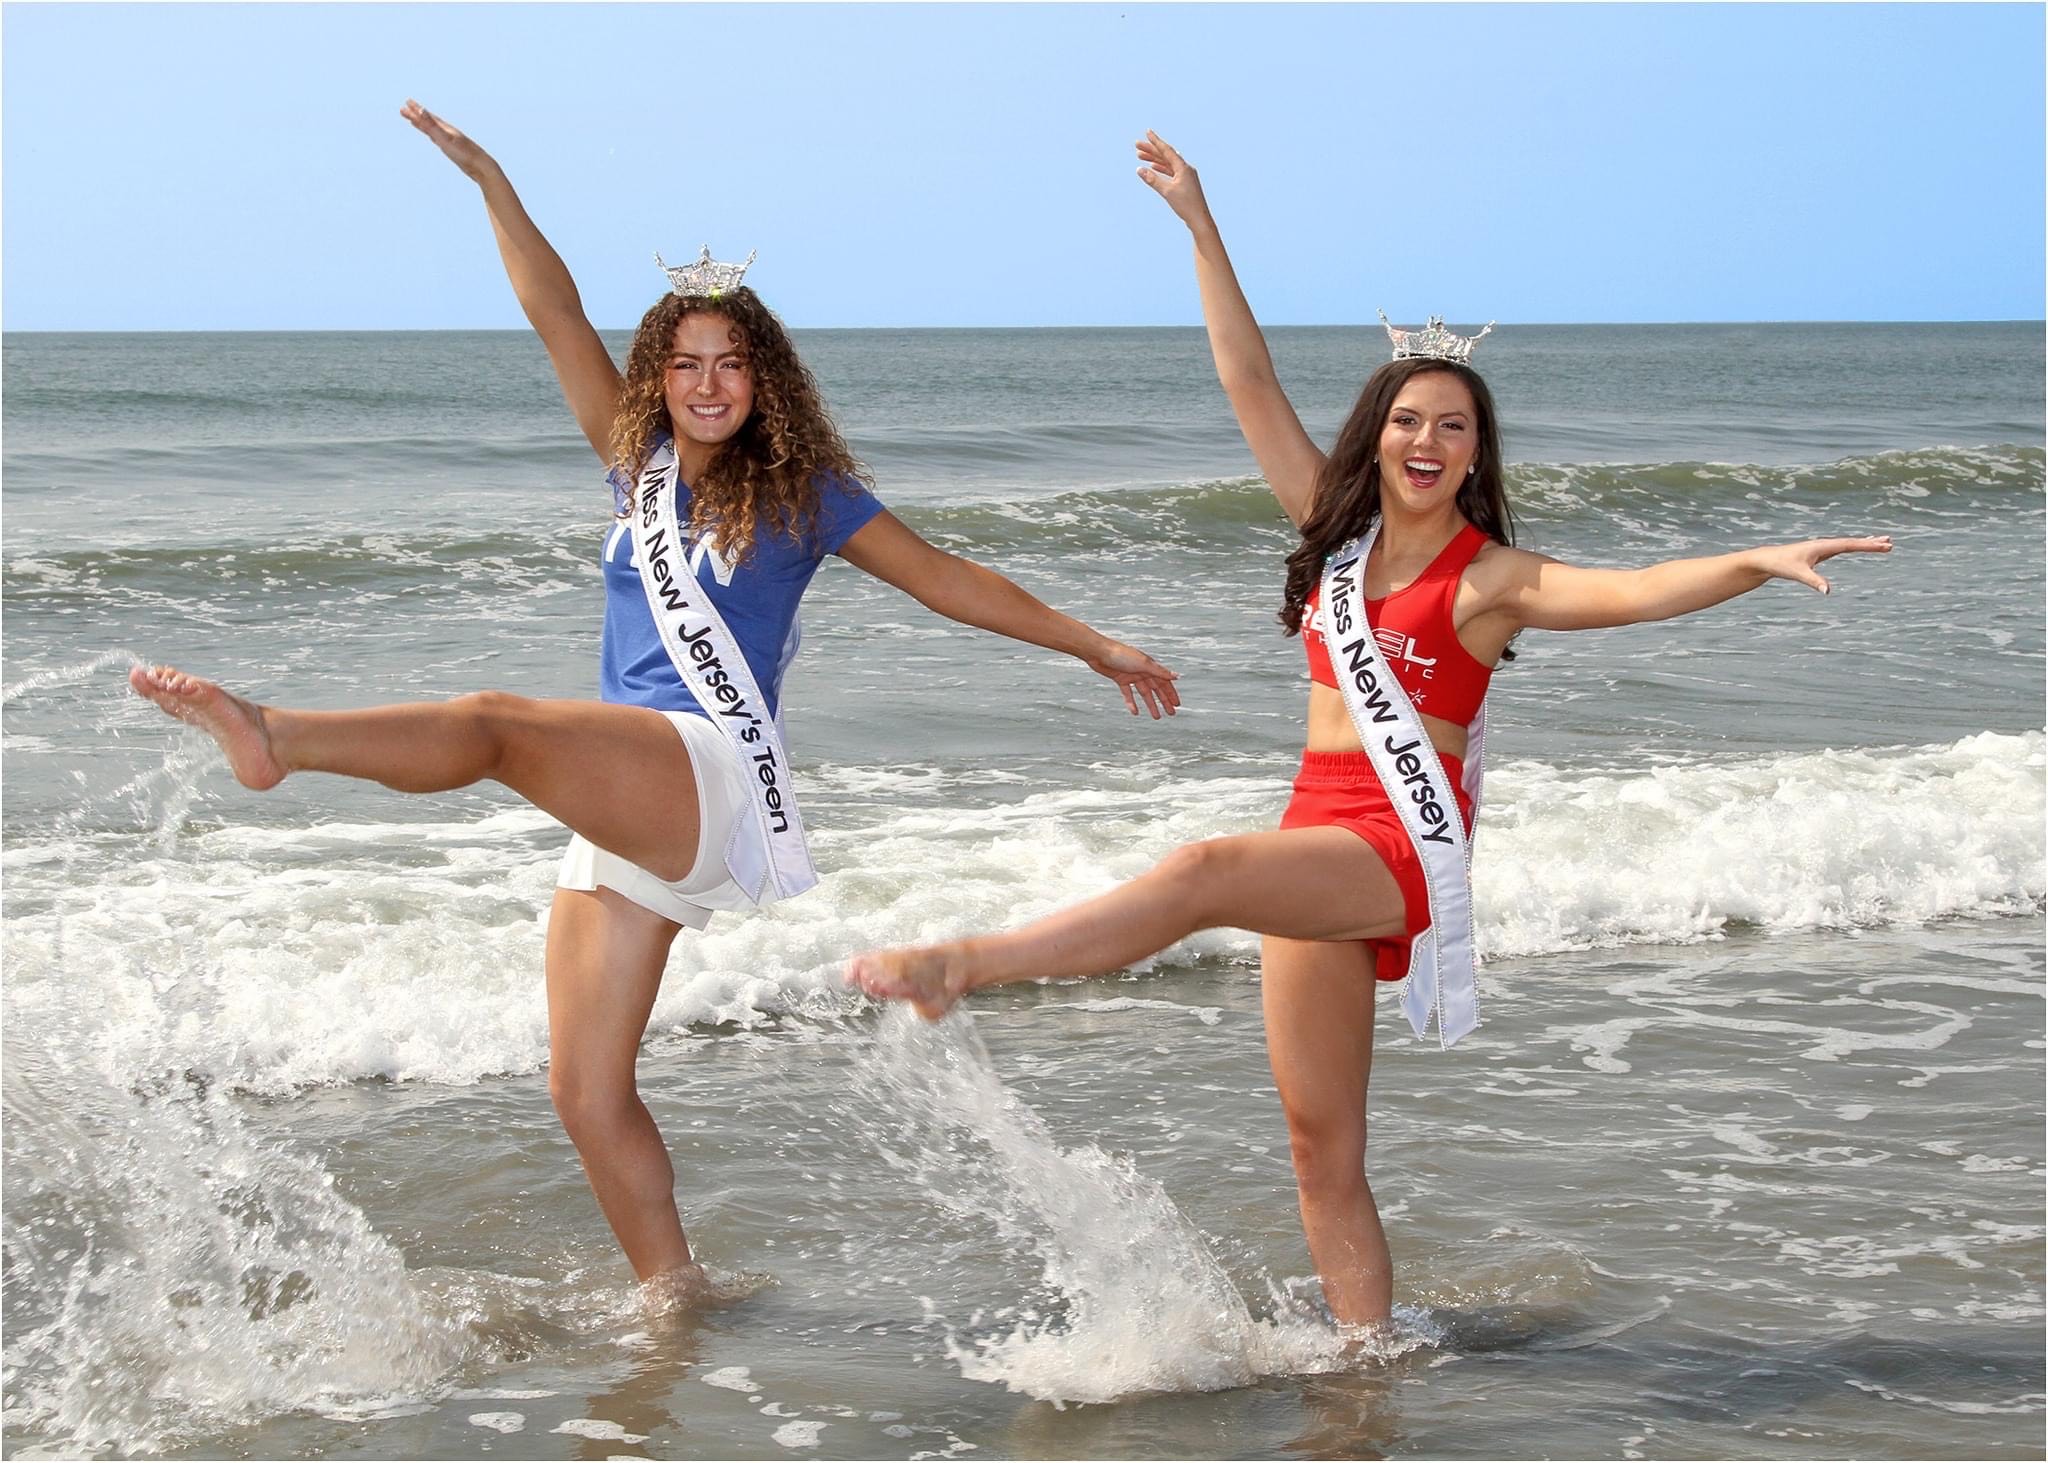 THE JOB OF MISS NEW JERSEY